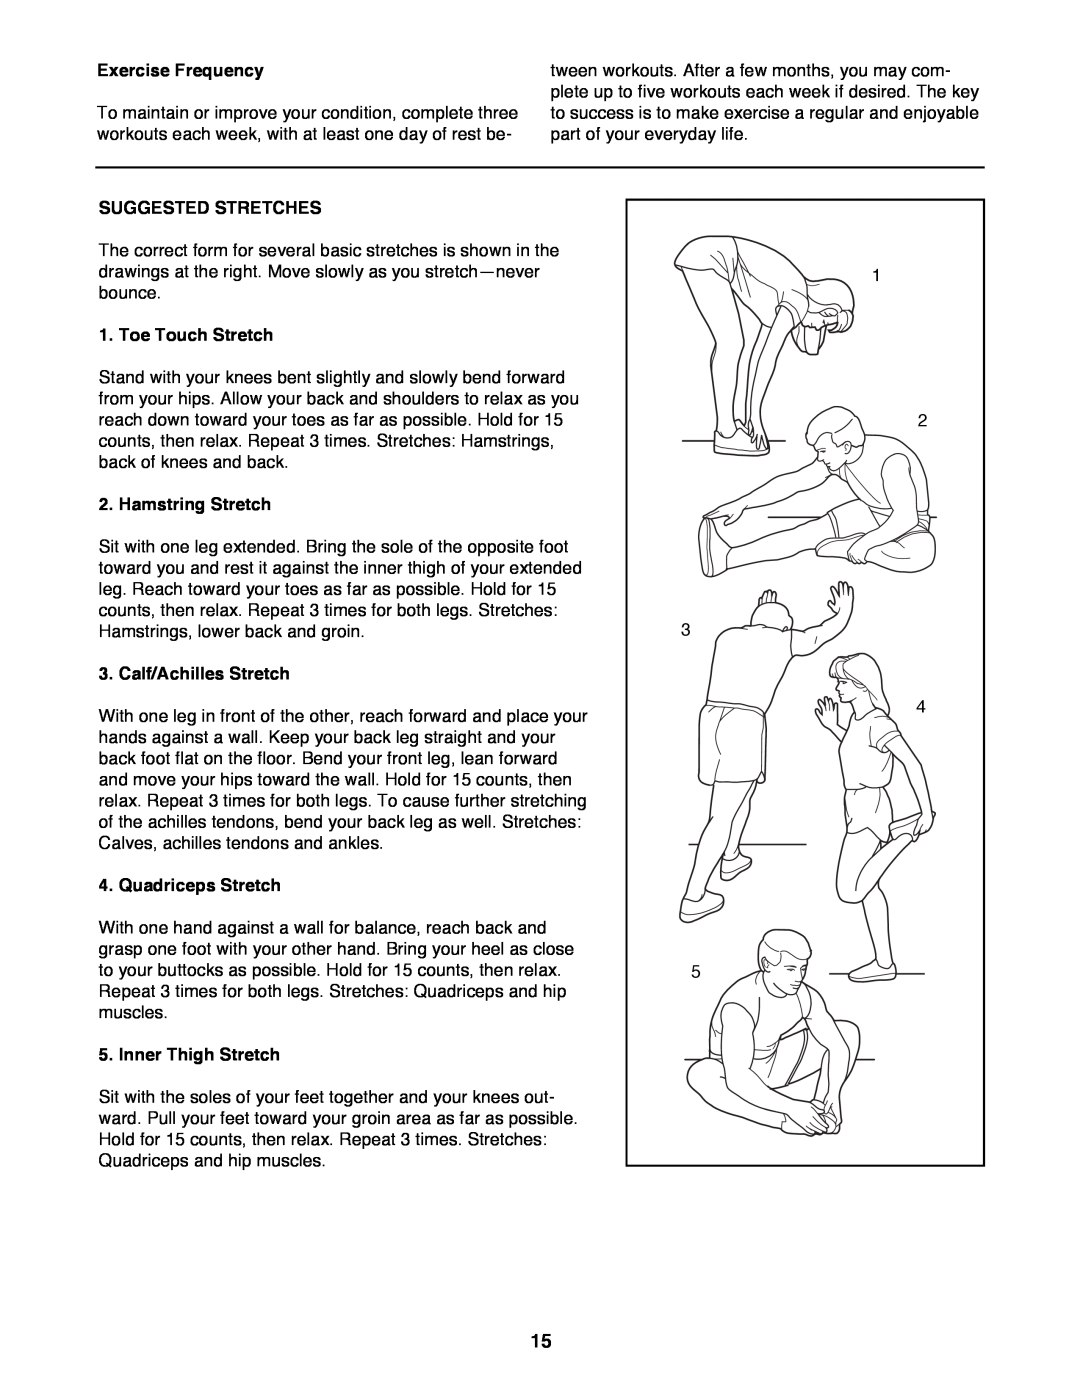 ProForm PFTL39191 Exercise Frequency, Suggested Stretches, Toe Touch Stretch, Hamstring Stretch, Calf/Achilles Stretch 